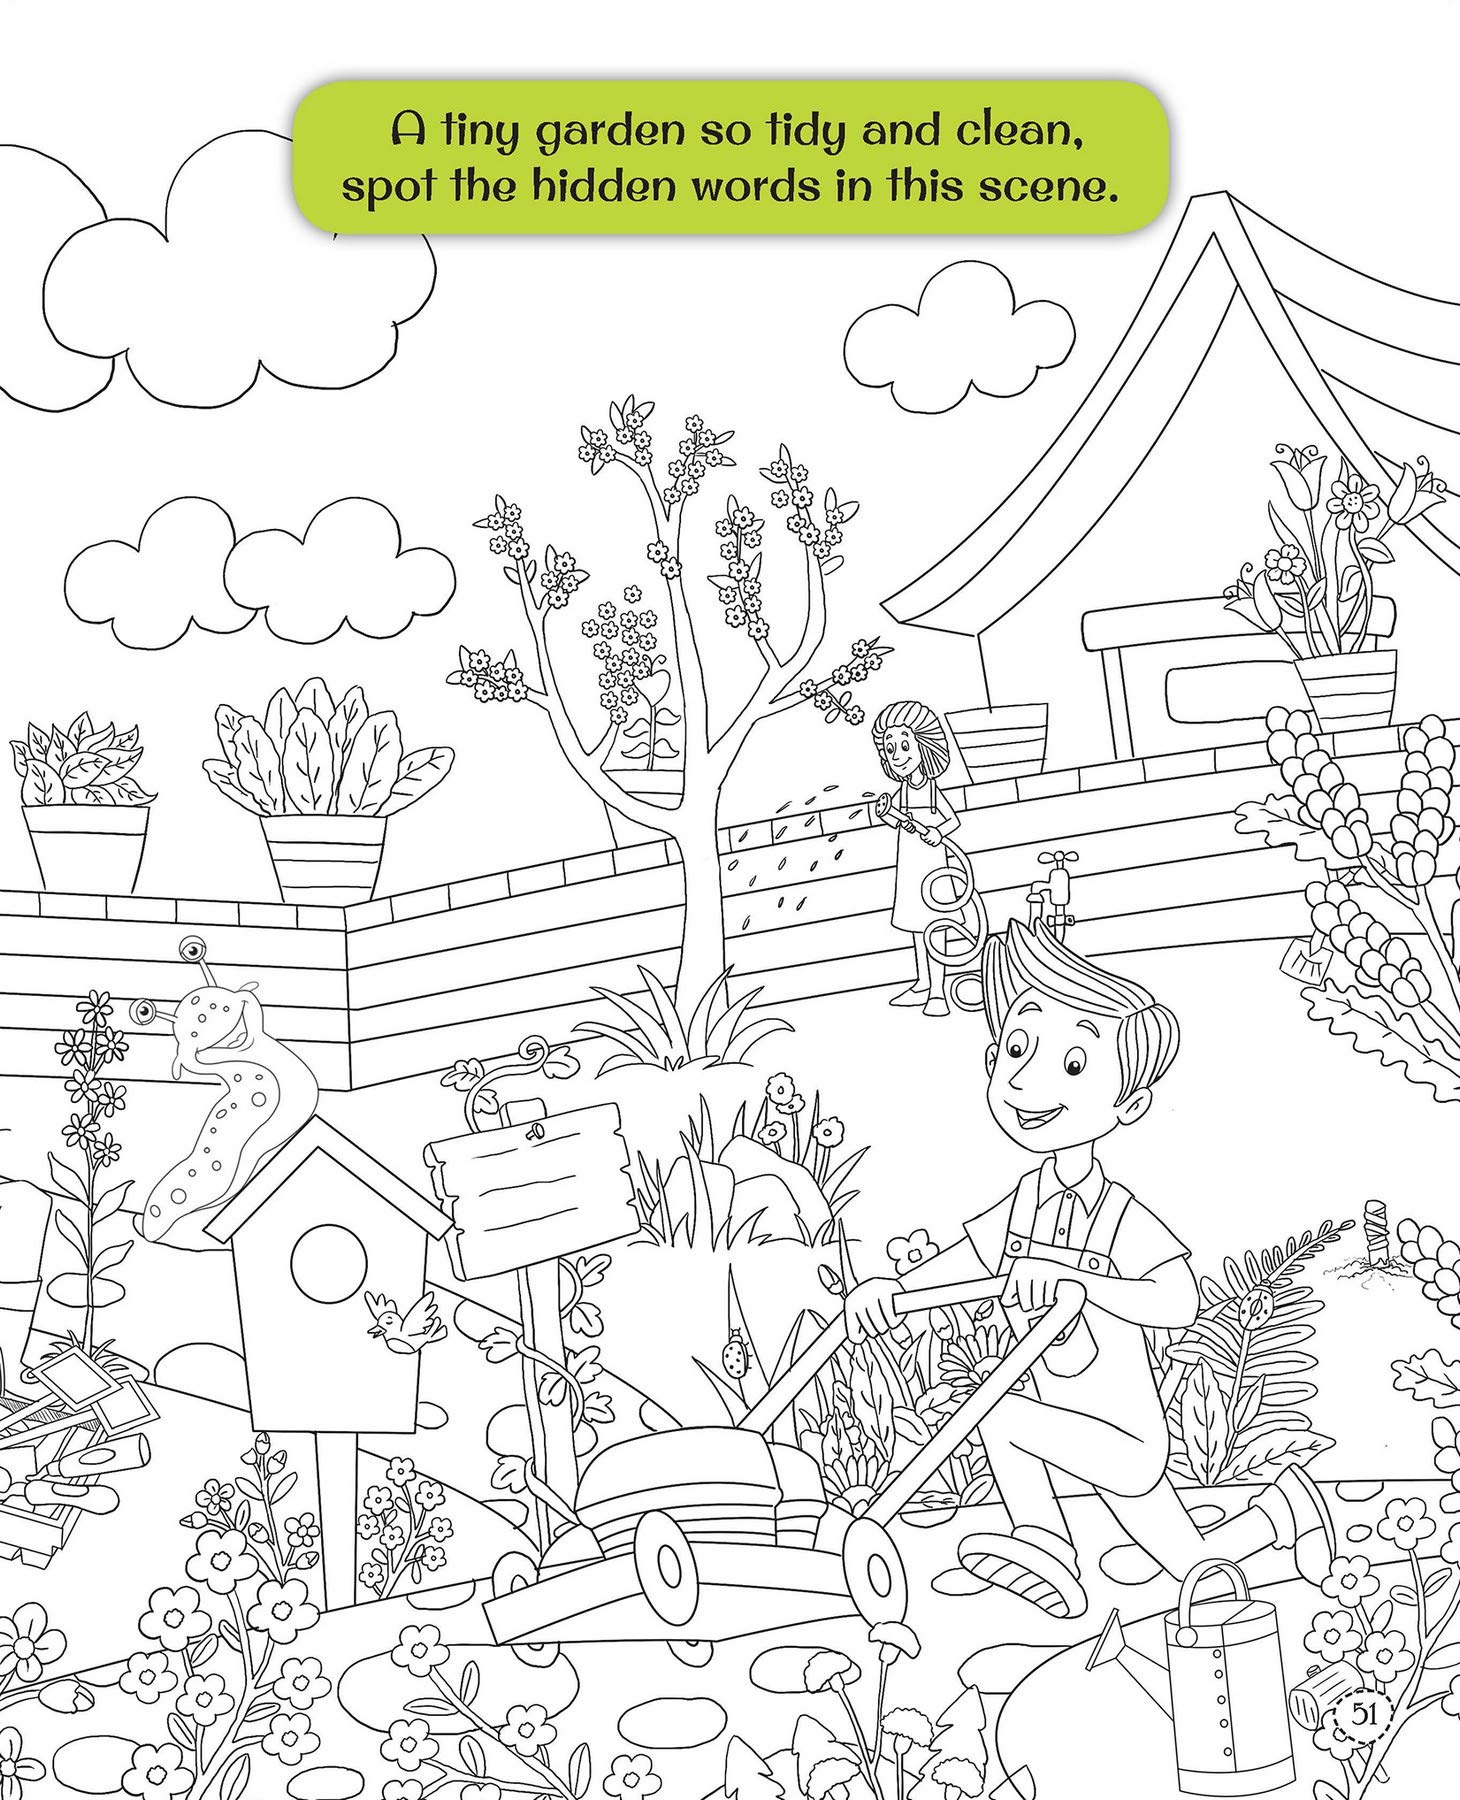 Everyday Things: Coloring Activity Book For Kids & Young Adult